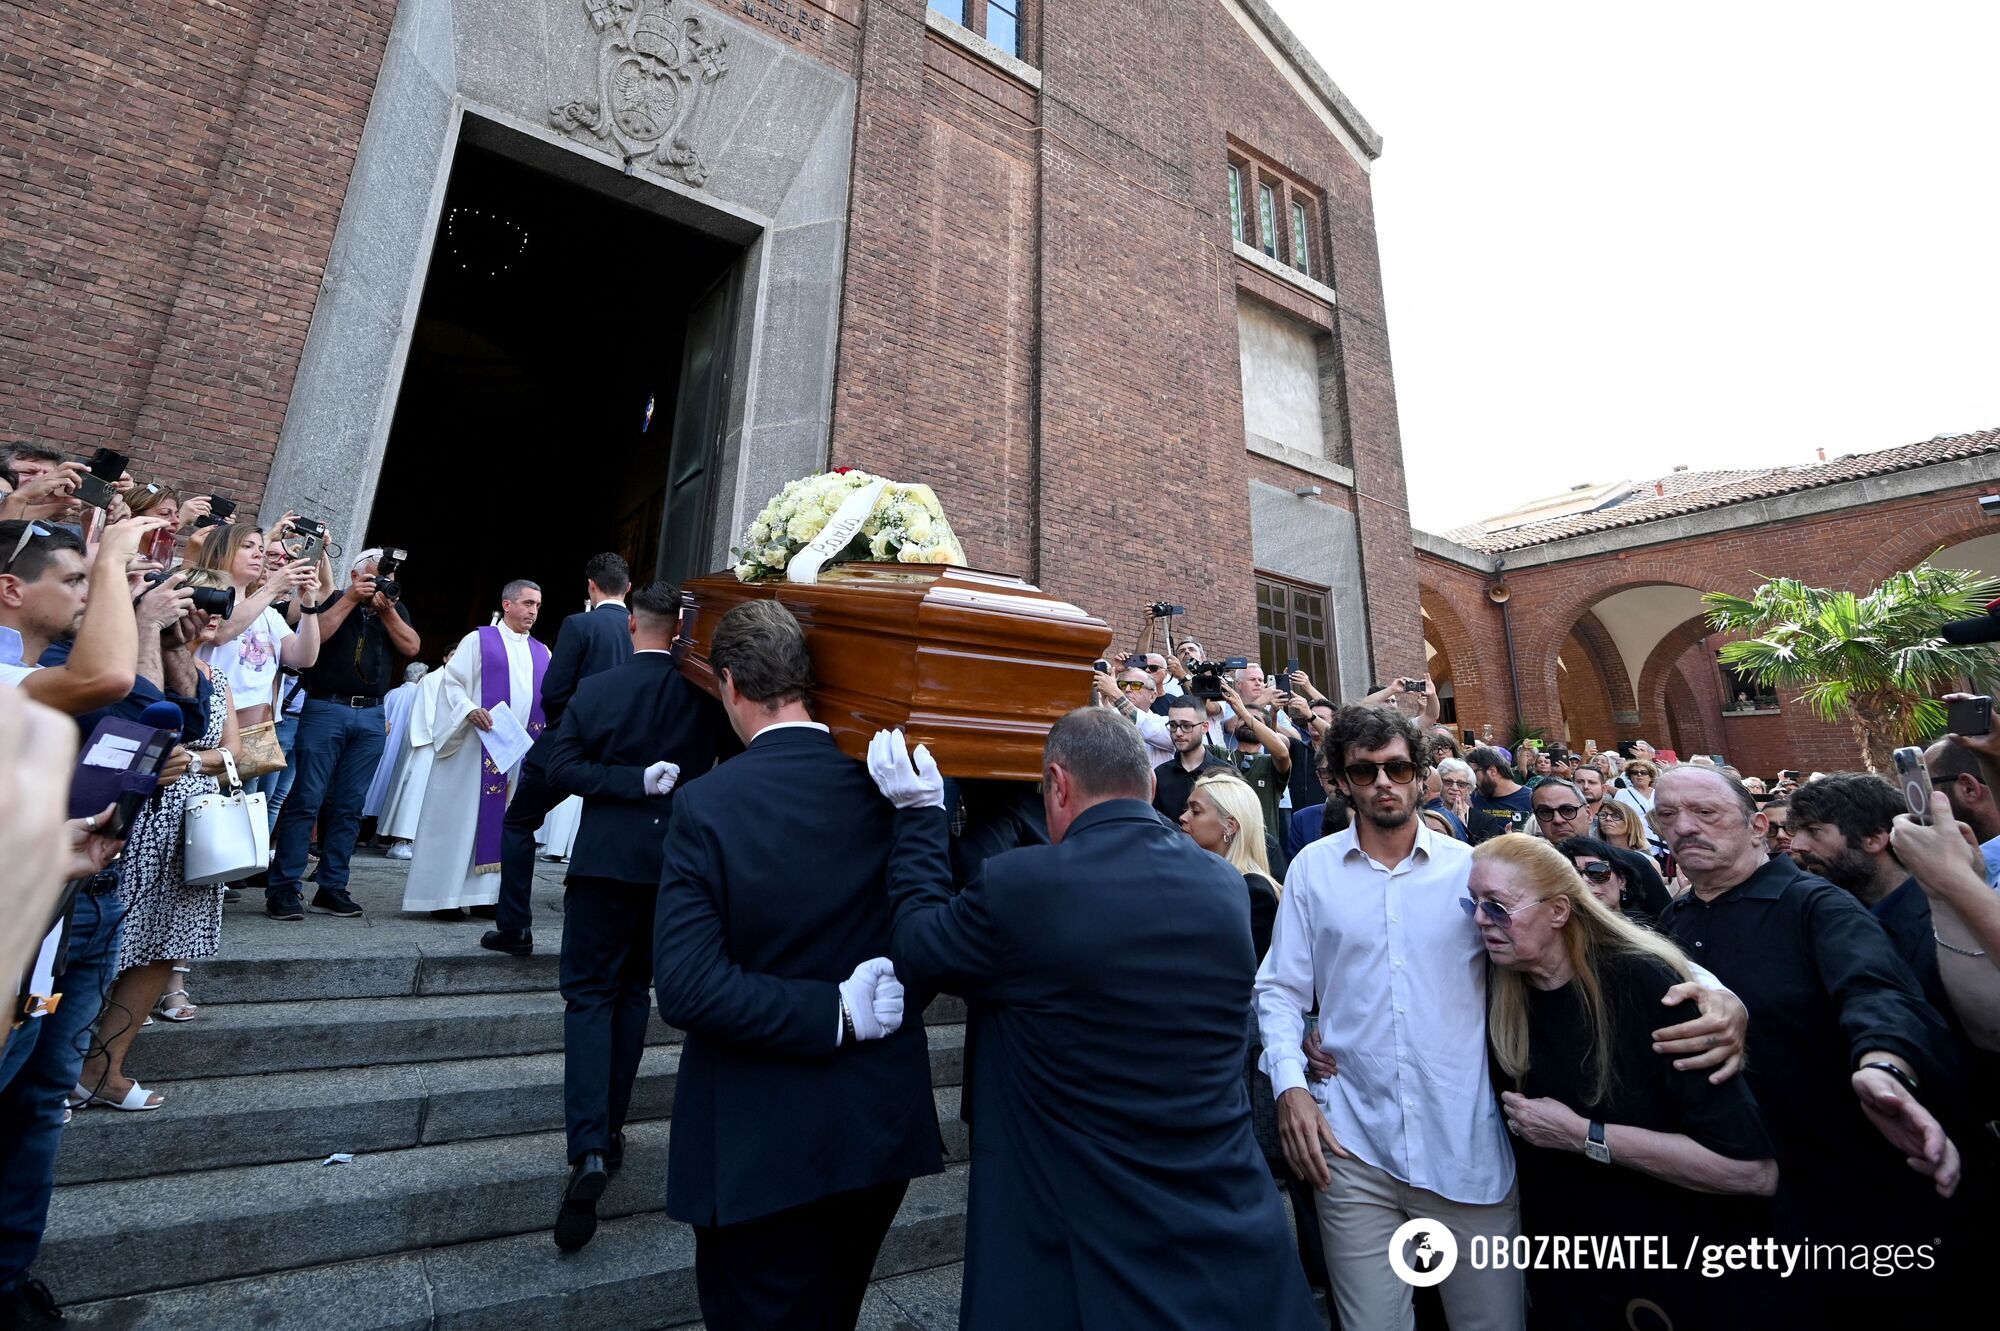 The funeral at L'italiano, thousands of people gathered: how Italy said goodbye to the legendary Toto Cutugno. Video